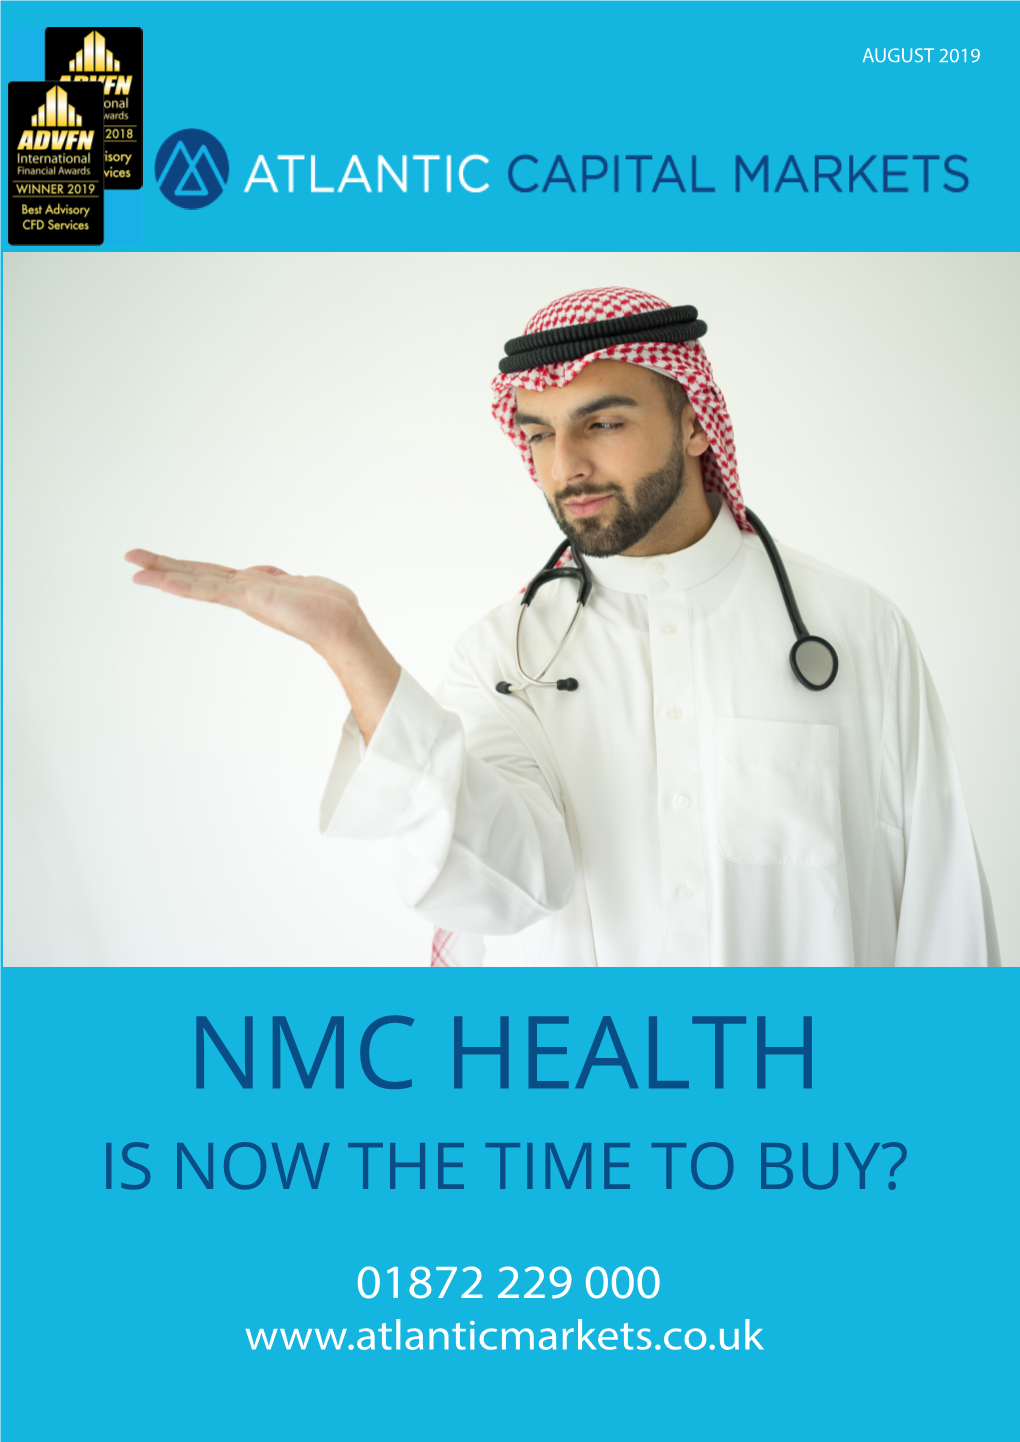 Nmc Health Is Now the Time to Buy?